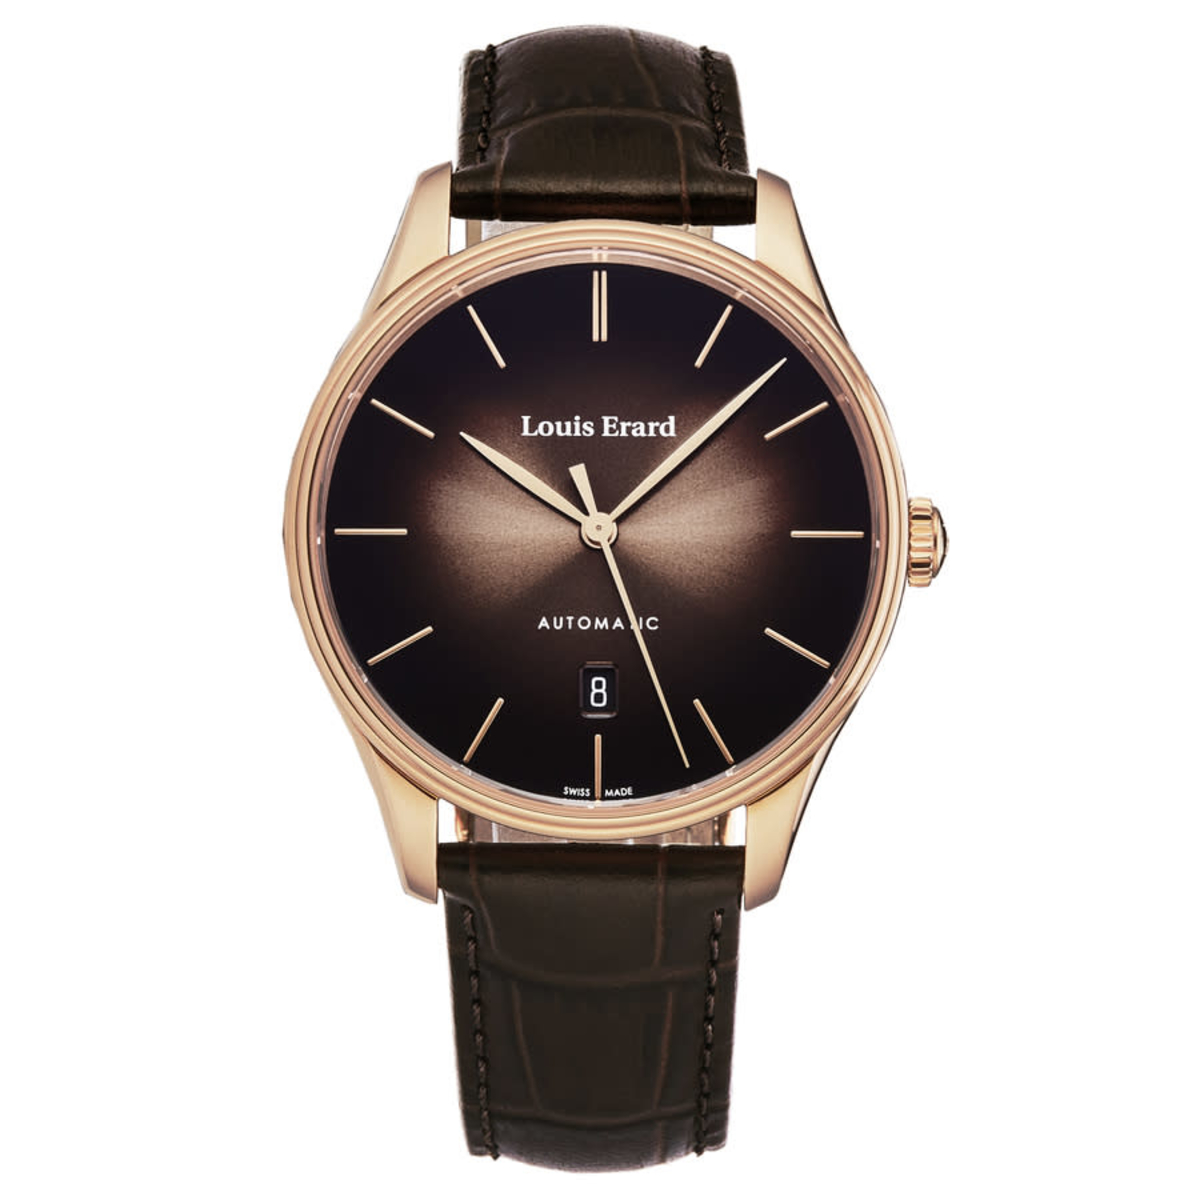 Louis Erard Automatic Watch Heritage Collection 2 Tone Rose Gold